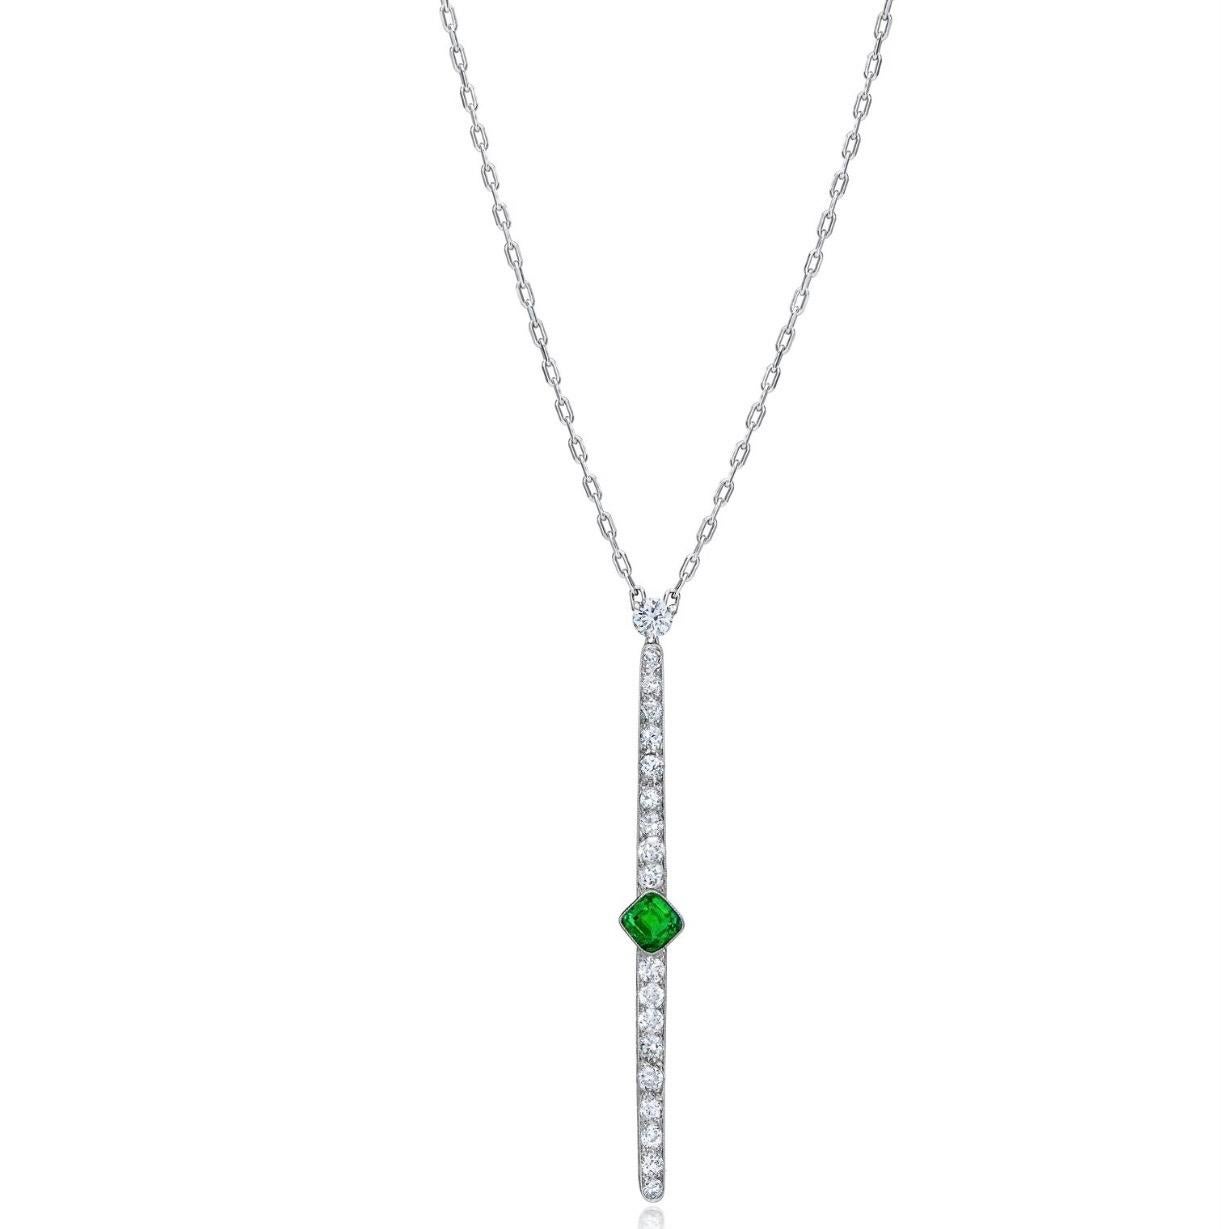 One- of- a - kind Mindi Mond New York Design from the Reconceived Collection.

1 natural Columbian Emerald, Cushion Step Cut 
bezel set 
Approx 0.75 Carat
Green color, strong saturation (very fine)

1 semi modern round brilliant cut diamond at